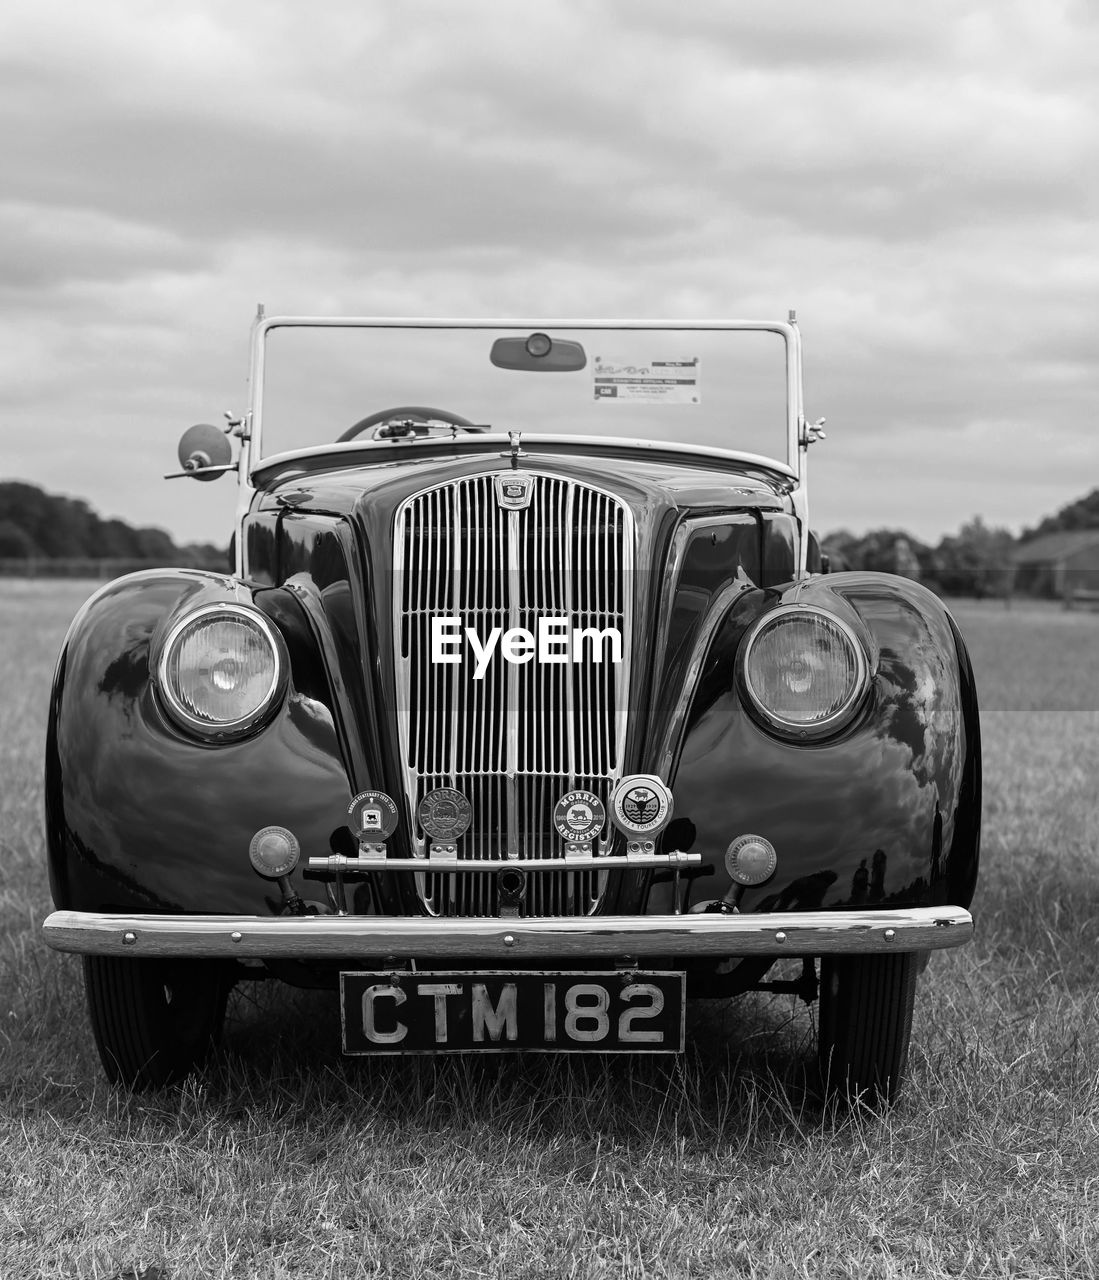 vehicle, car, land vehicle, vintage car, motor vehicle, retro styled, mode of transportation, black and white, transportation, cloud, sky, grass, antique car, nature, nostalgia, monochrome photography, field, luxury vehicle, plant, monochrome, automobile, land, day, landscape, front view, the past, headlight, history, no people, old, rural scene, outdoors, metal